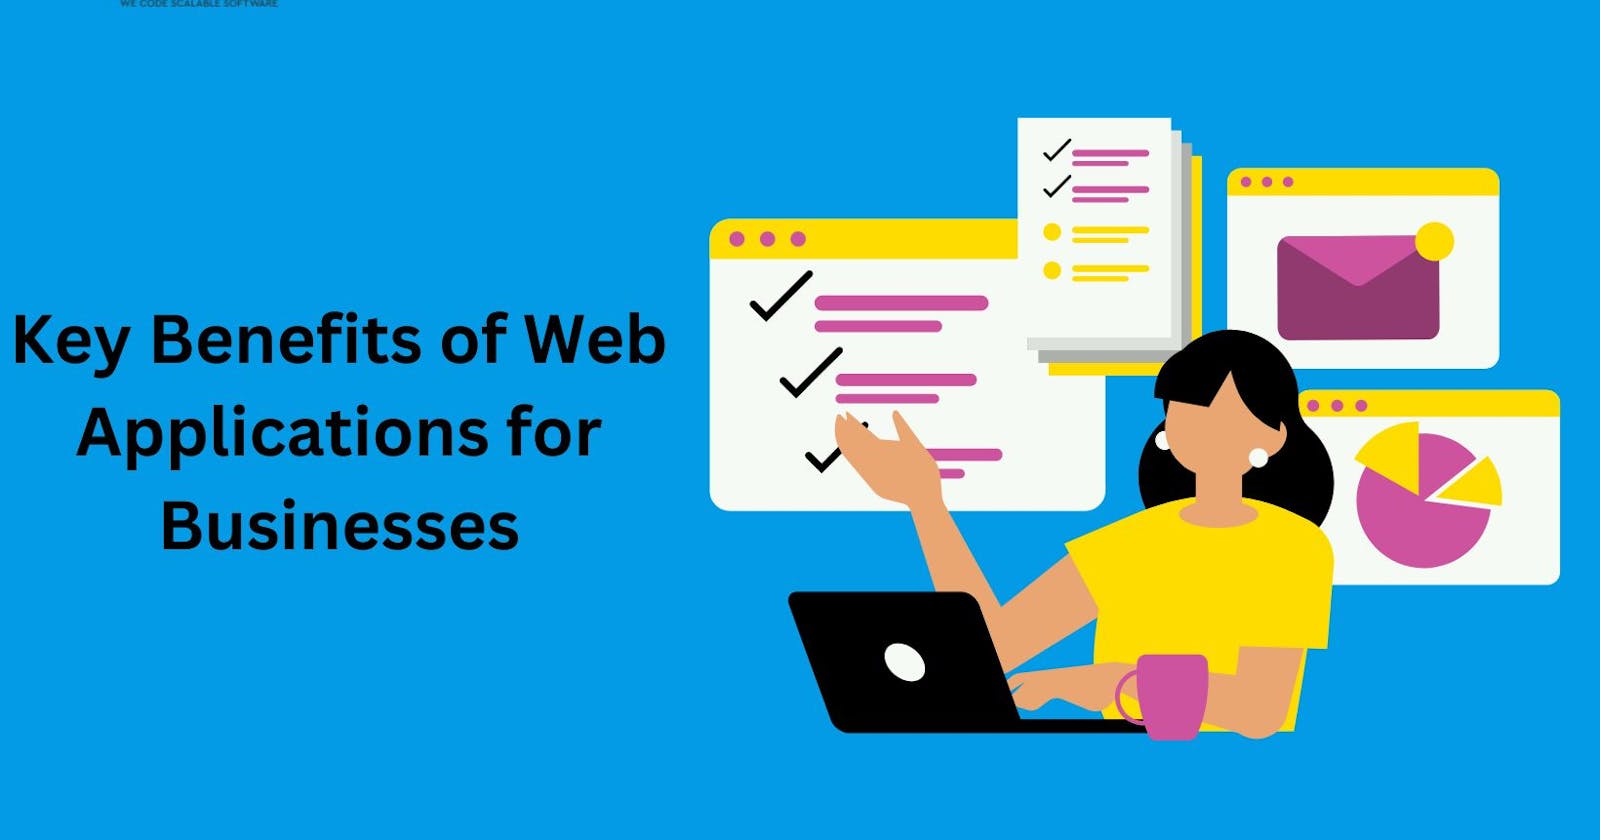 Key Benefits of Web Applications for Businesses